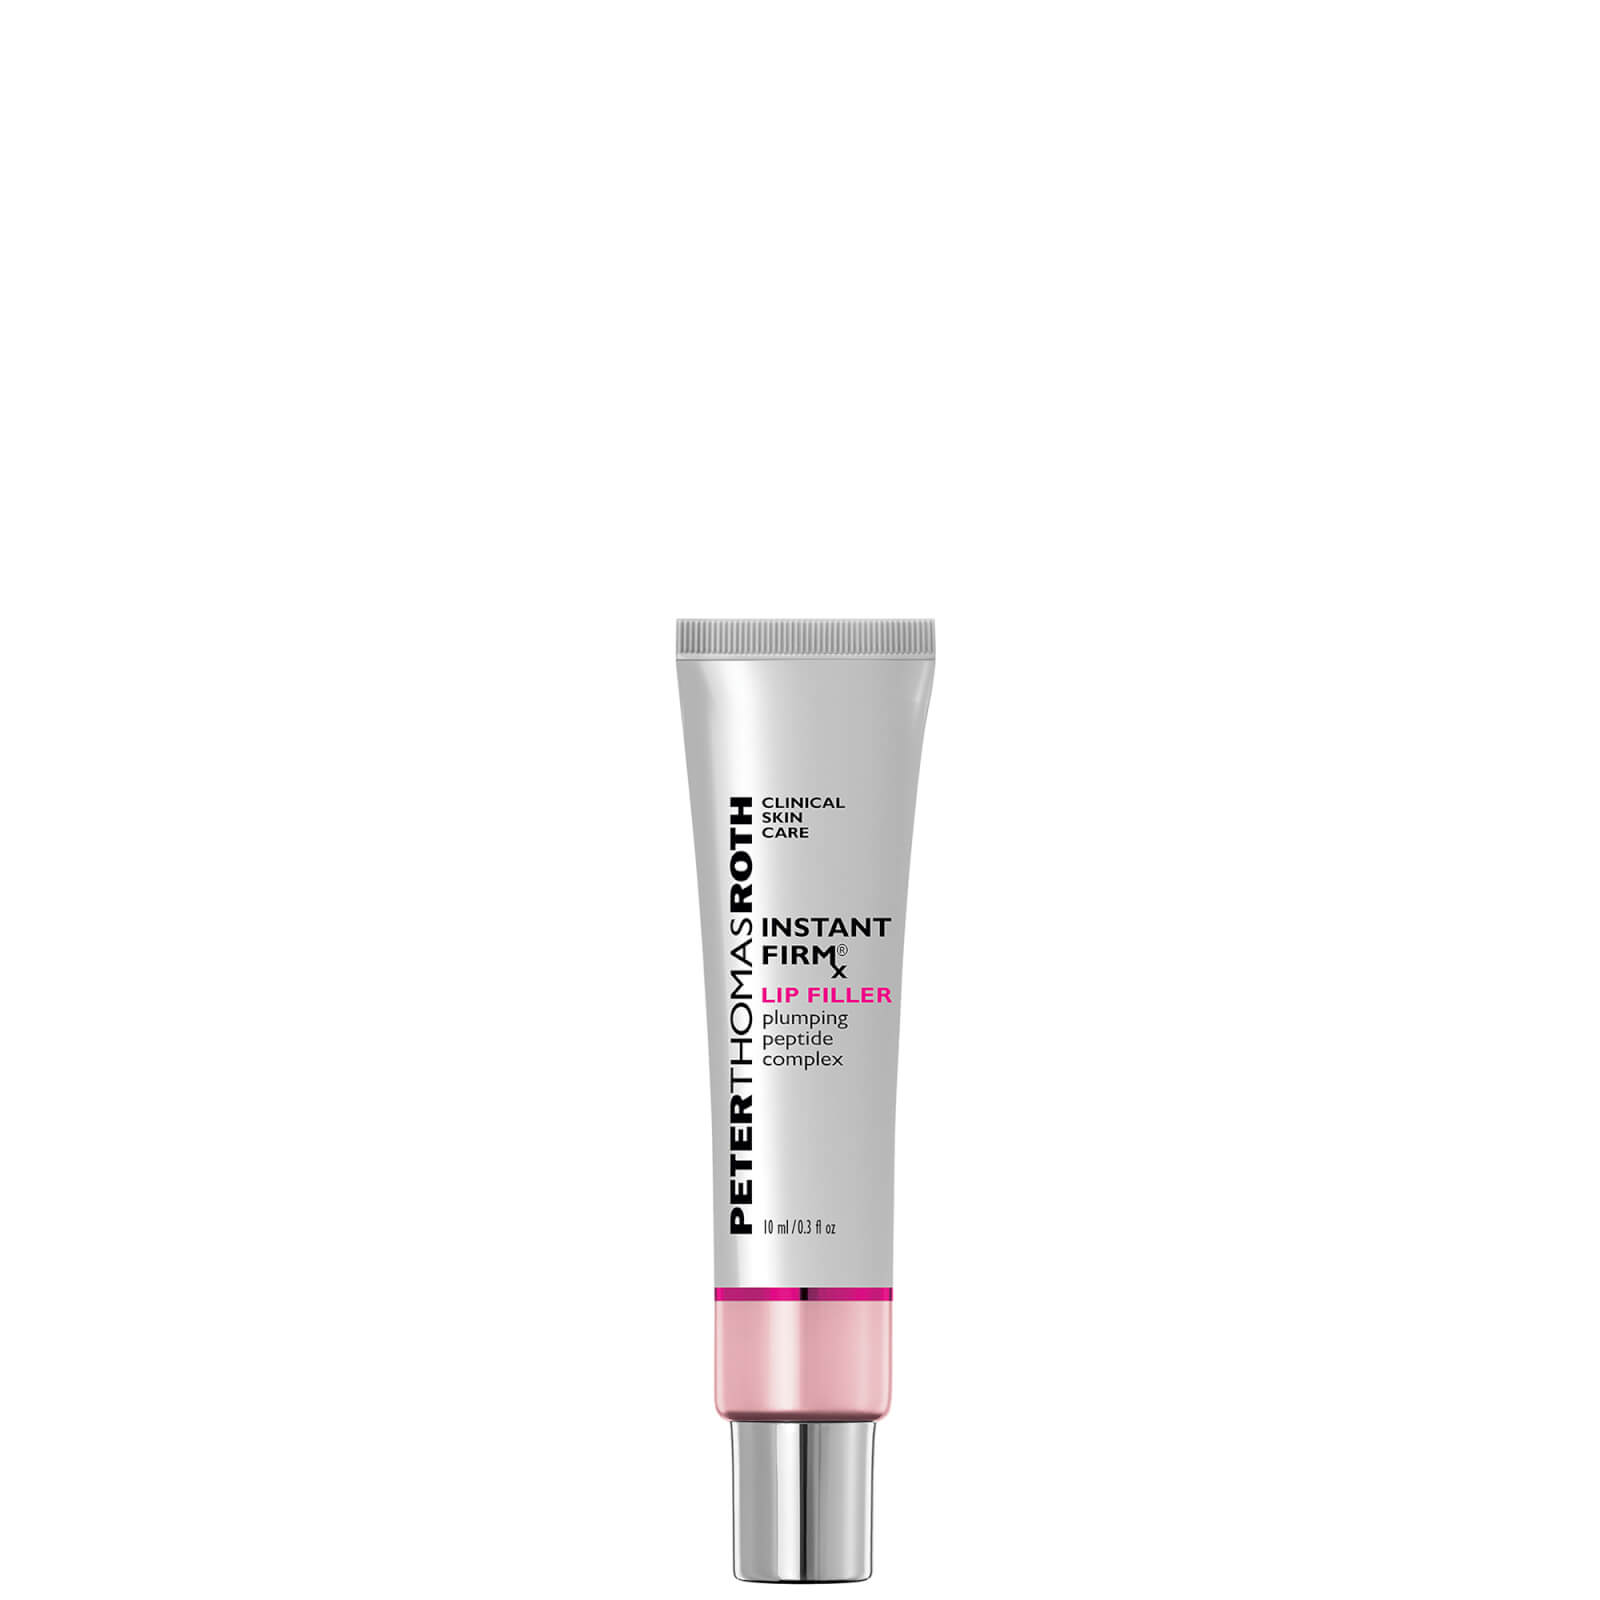 Peter Thomas Roth Instant Firmx Lip Treatment 30g